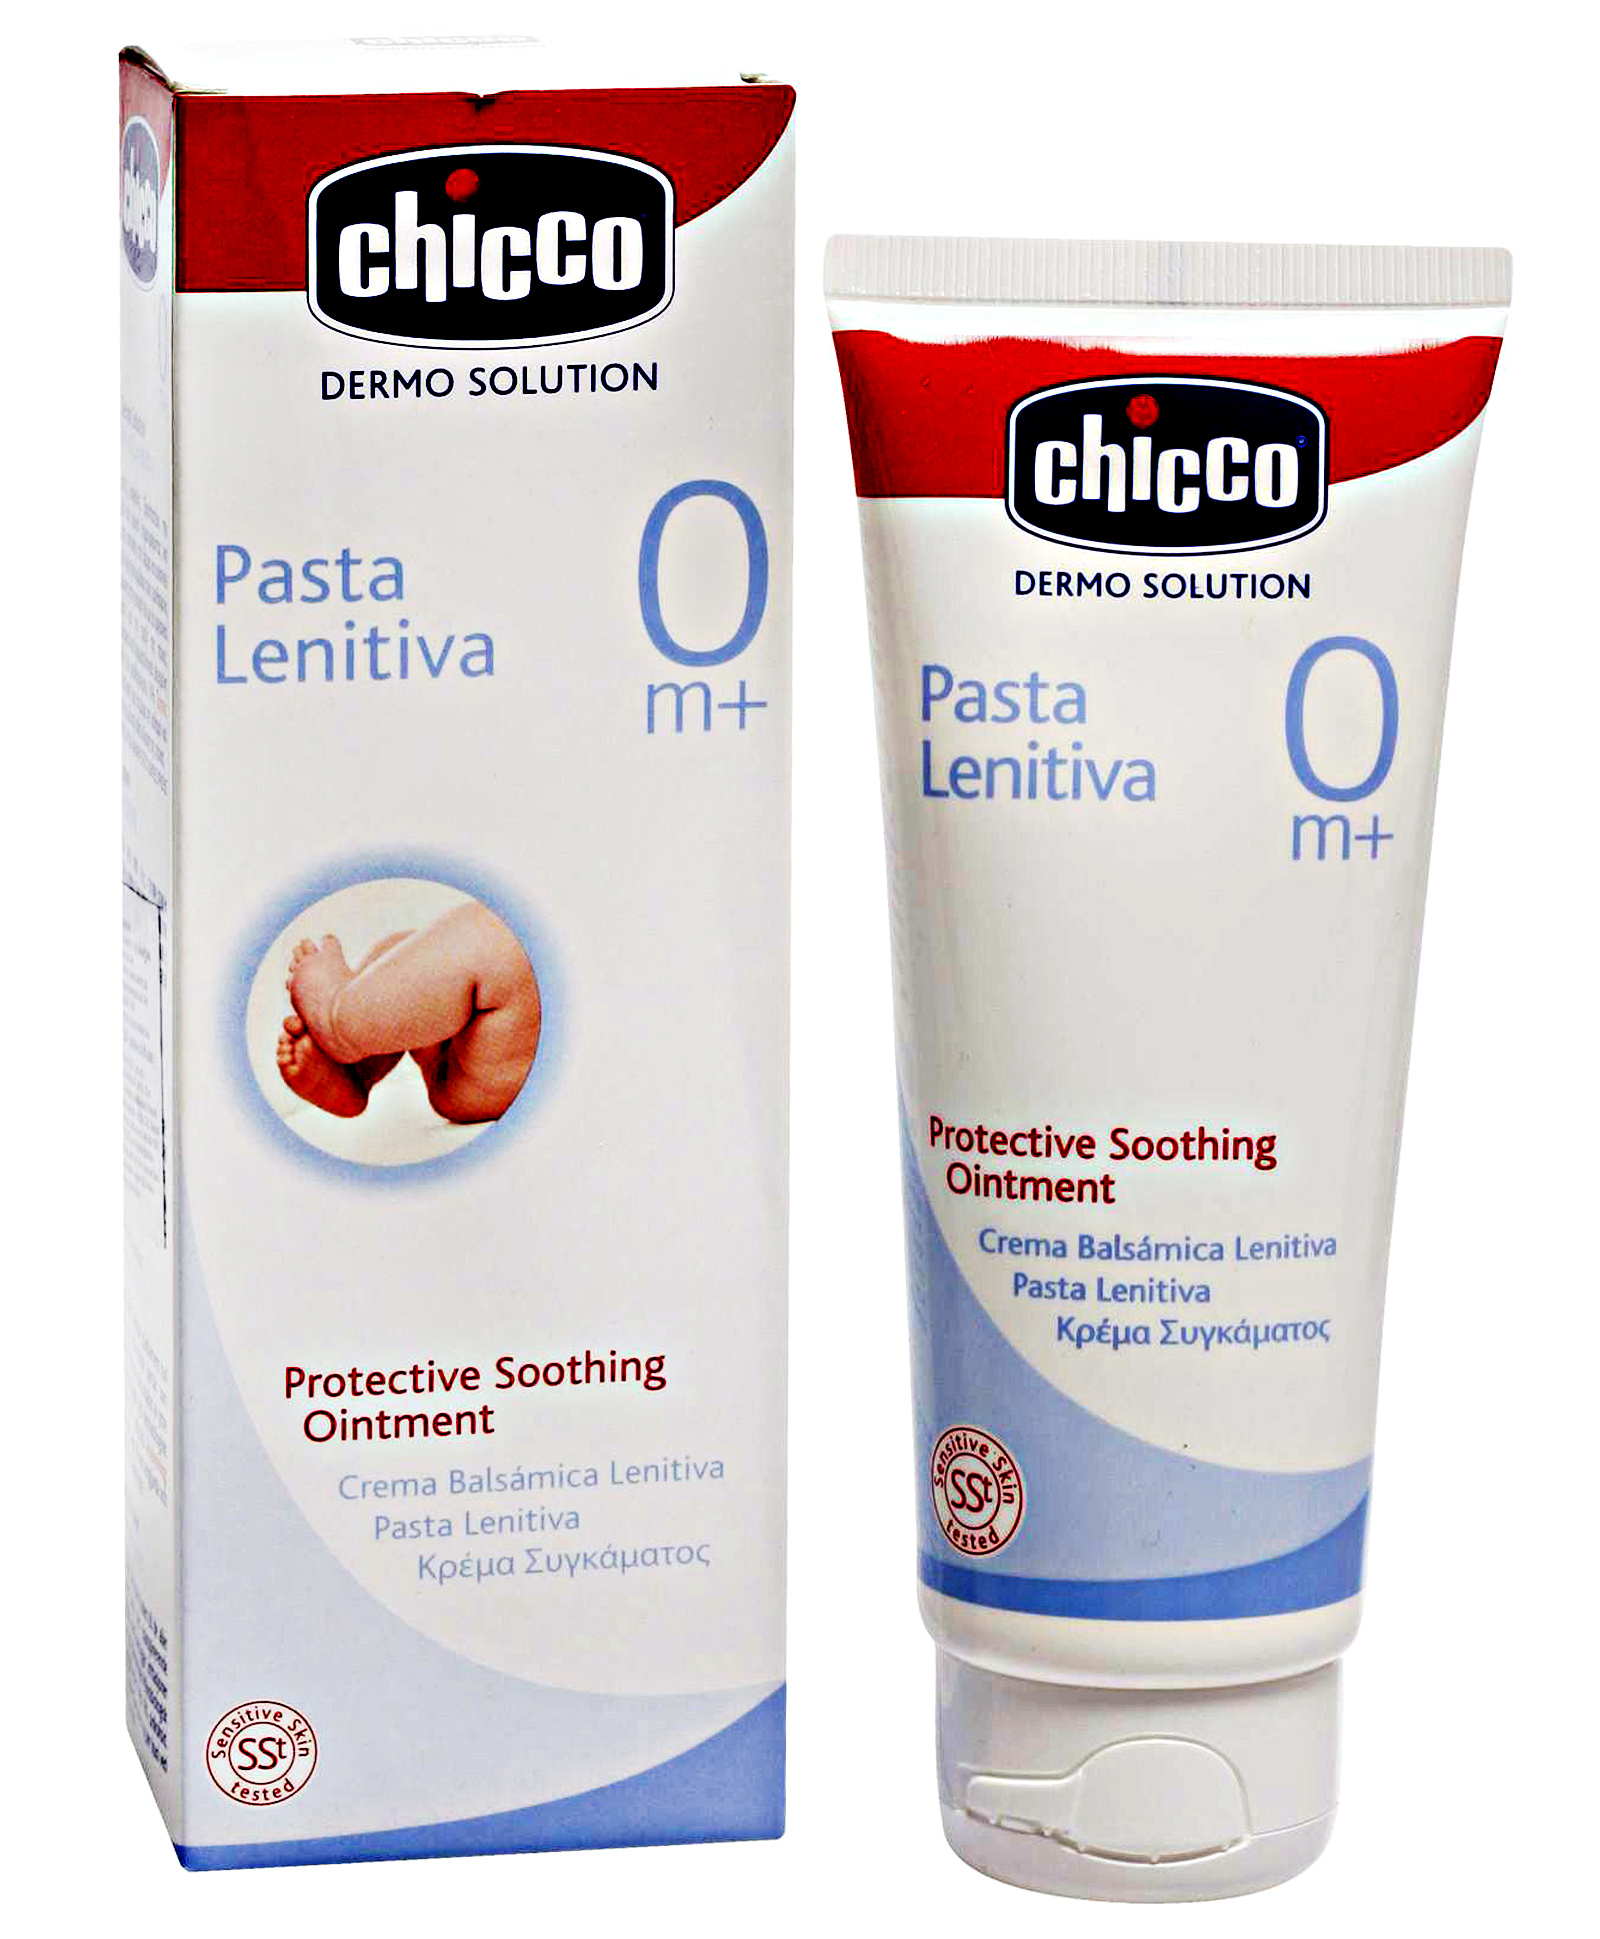 Chicco - Protective Soothing Ointment